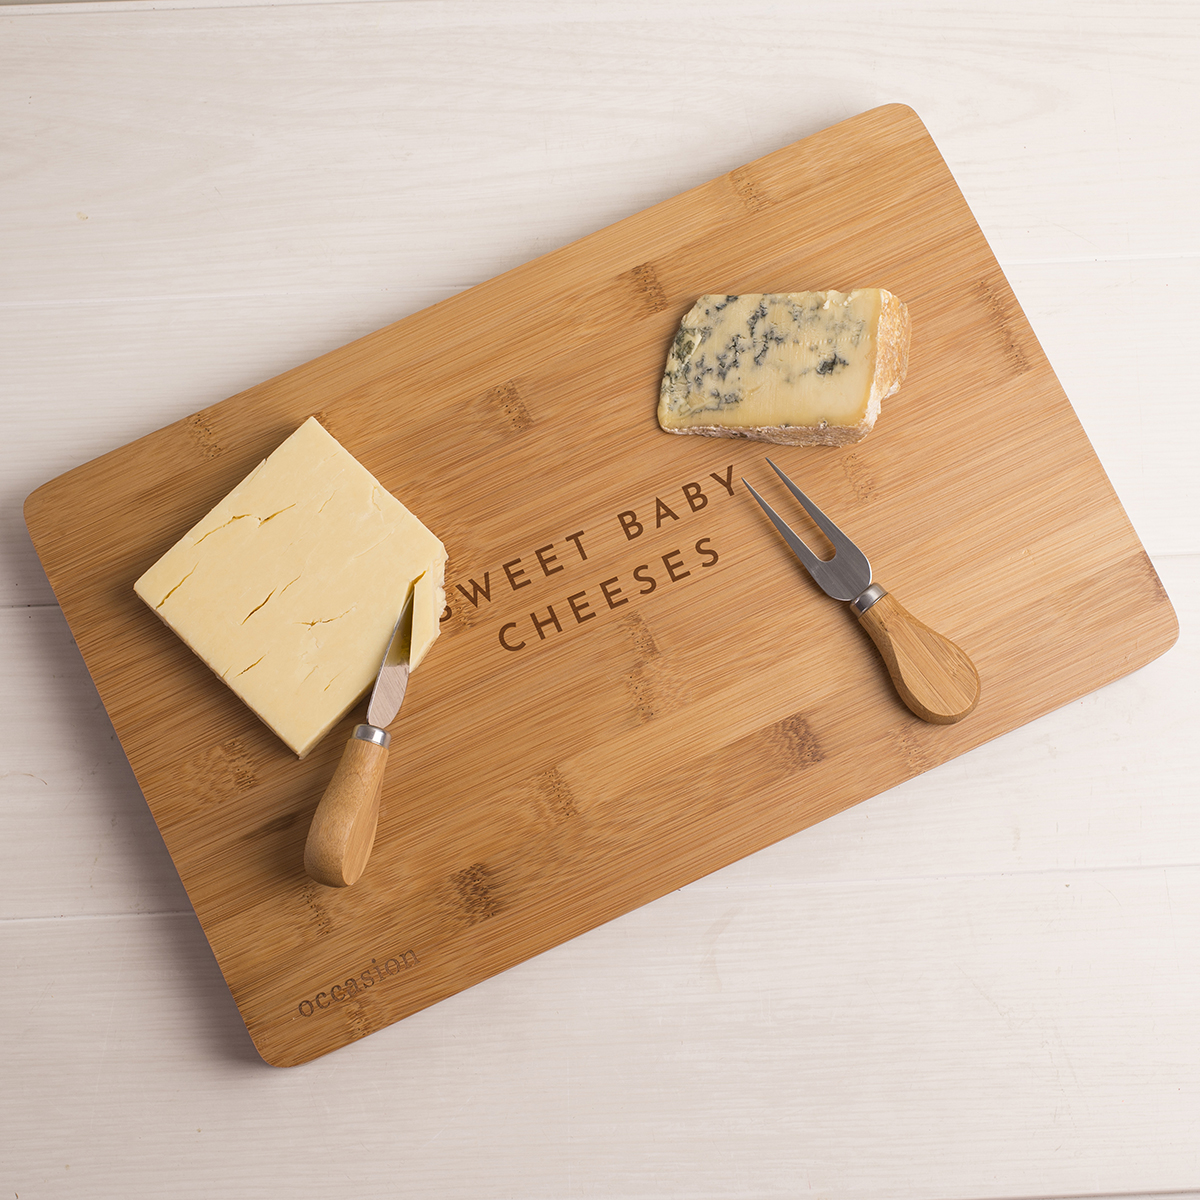 Create Your Own - Personalised Large Rectangular Wooden Cheeseboard